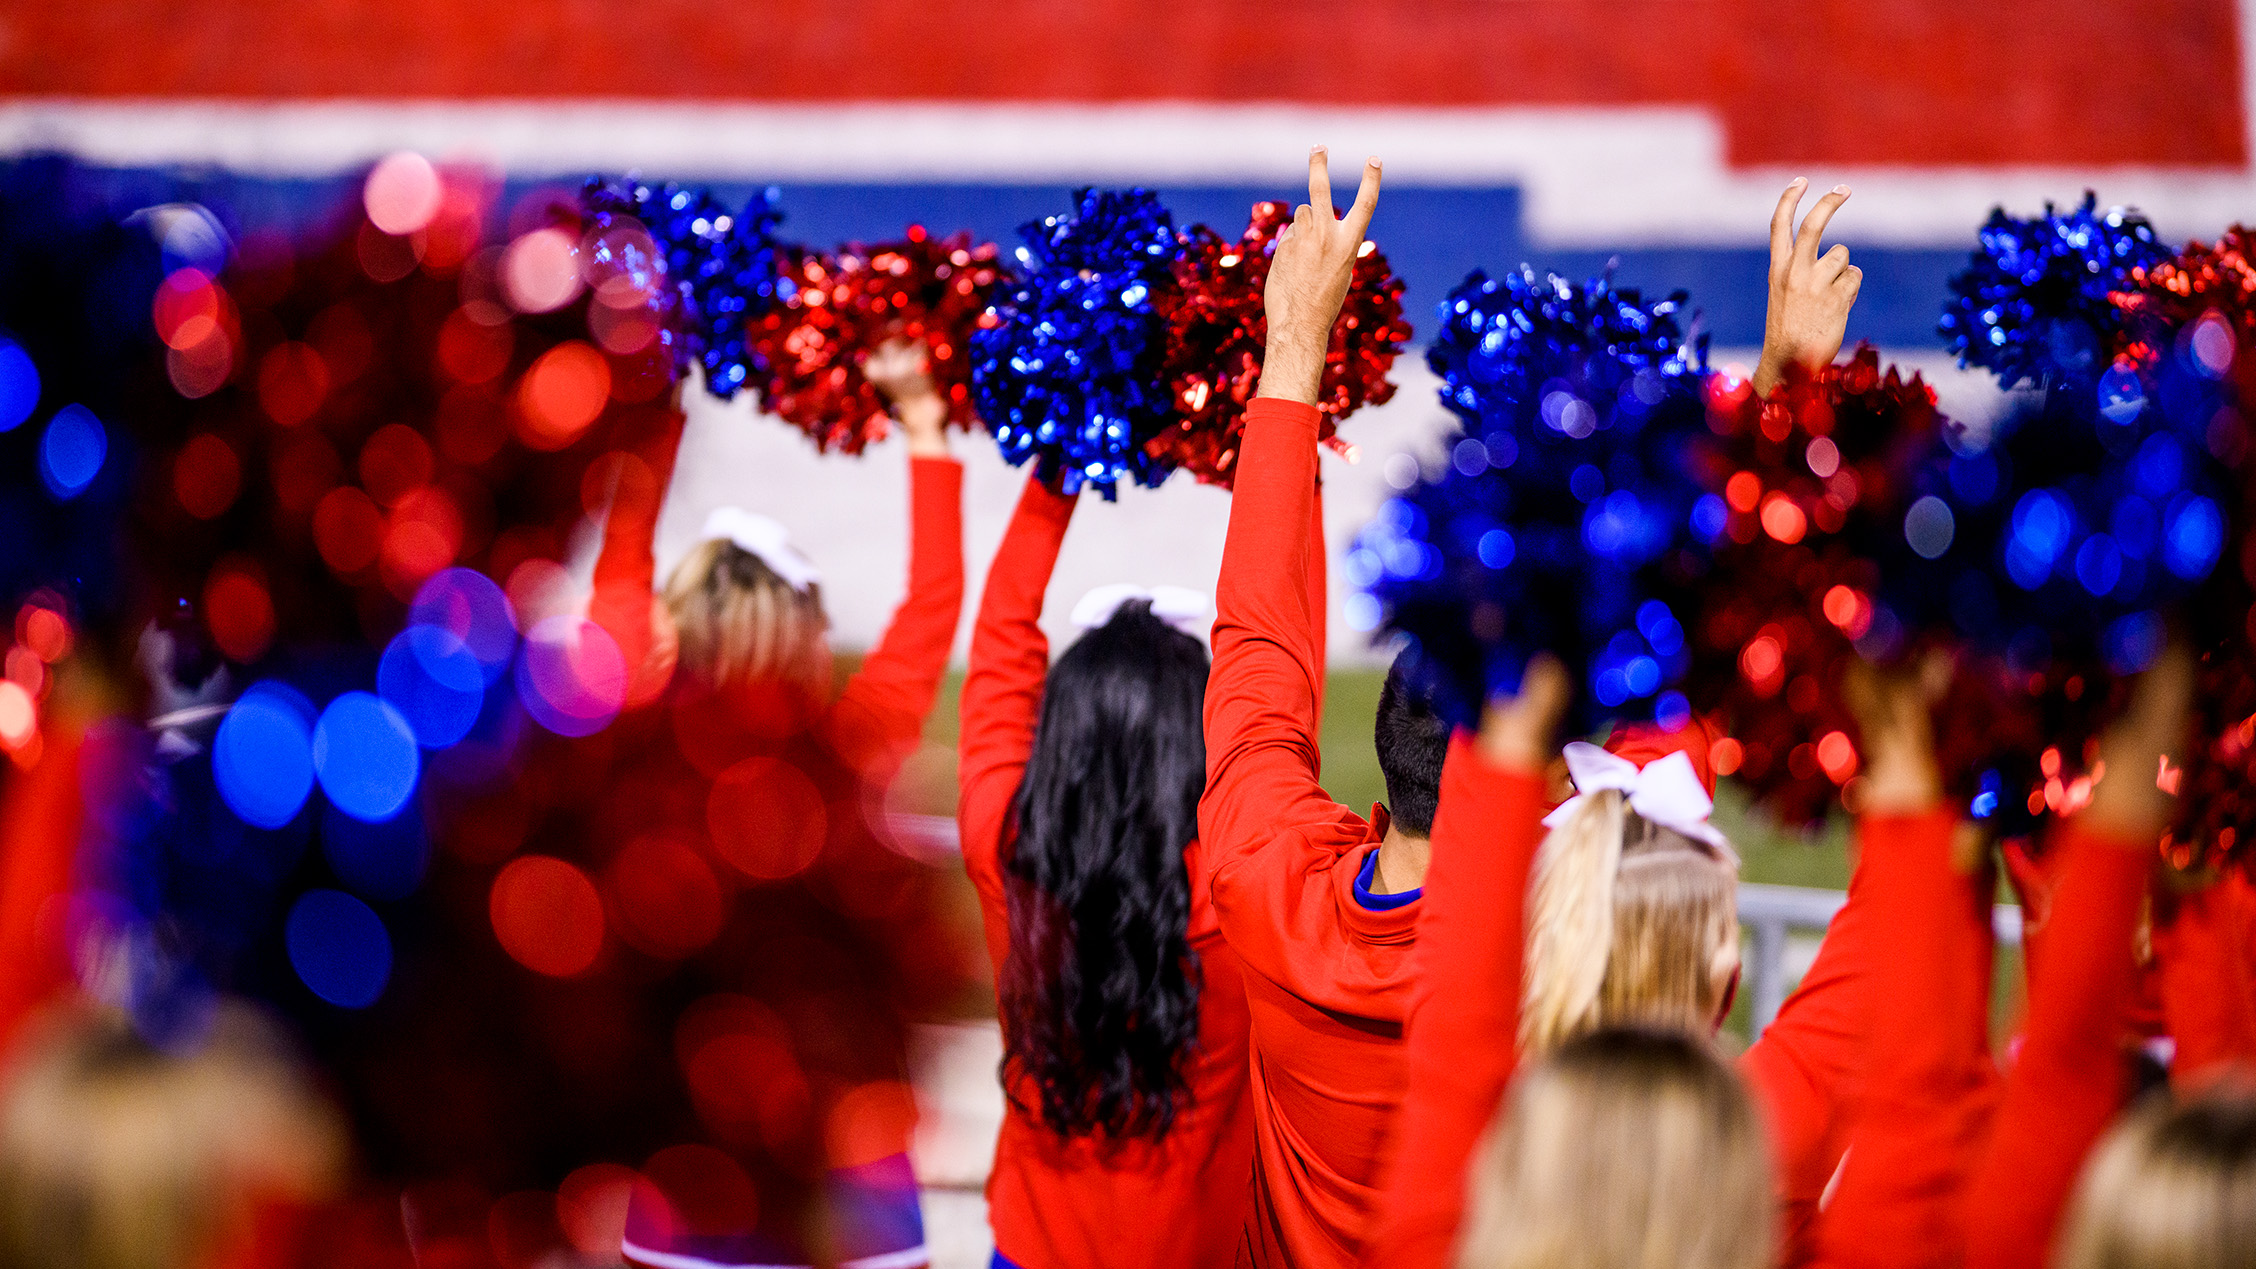 cheerleaders with red and blue poms and holding up pony ears hand sign